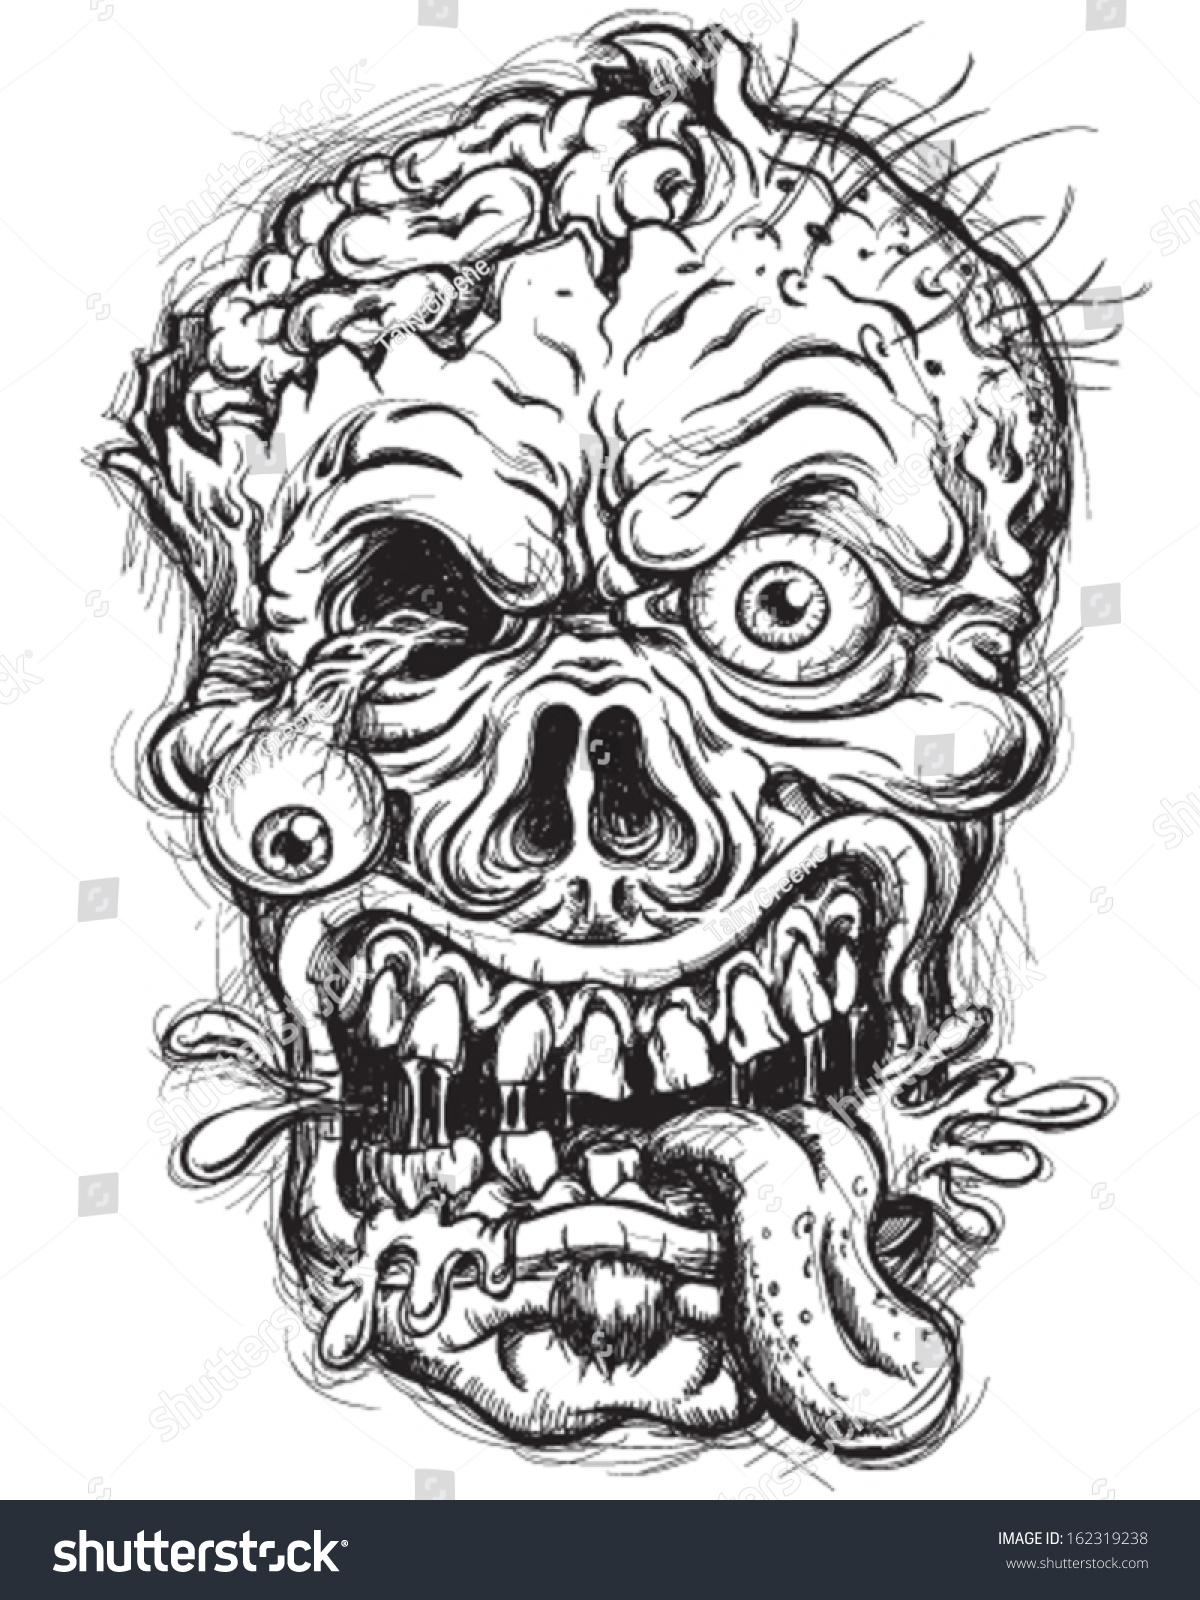 Sketchy Detailed Zombie Head Stock Vector Illustration 162319238